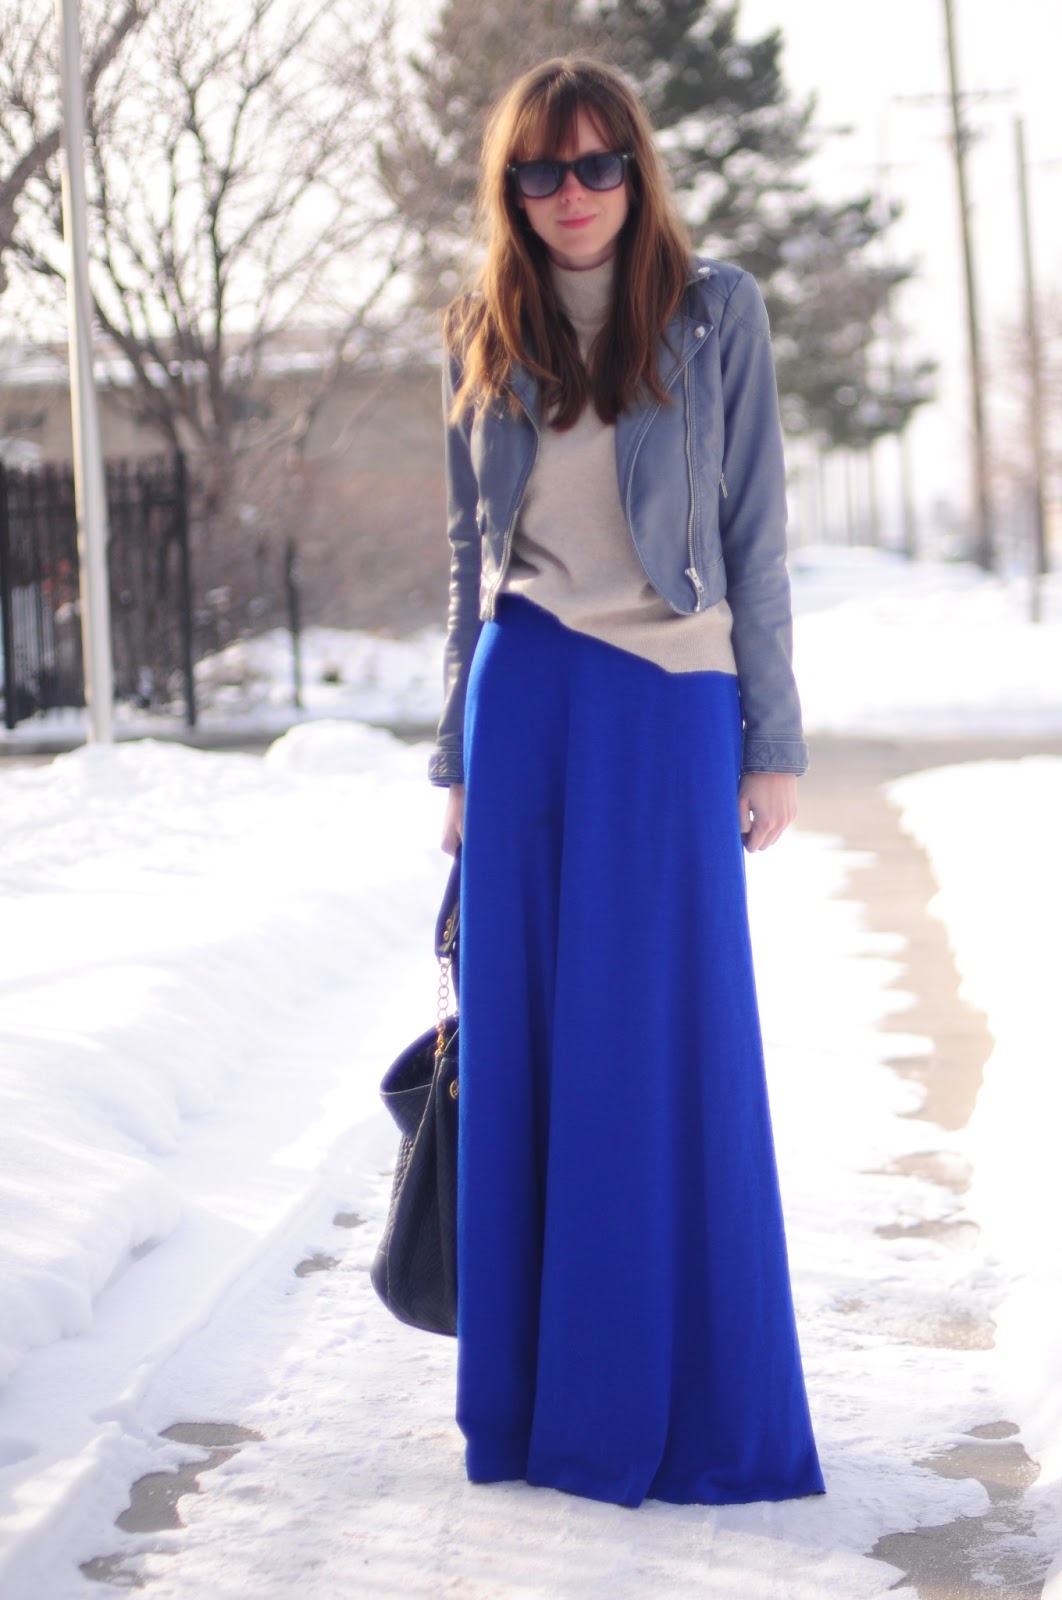 Motorcycle jacket and blue maxi skirt